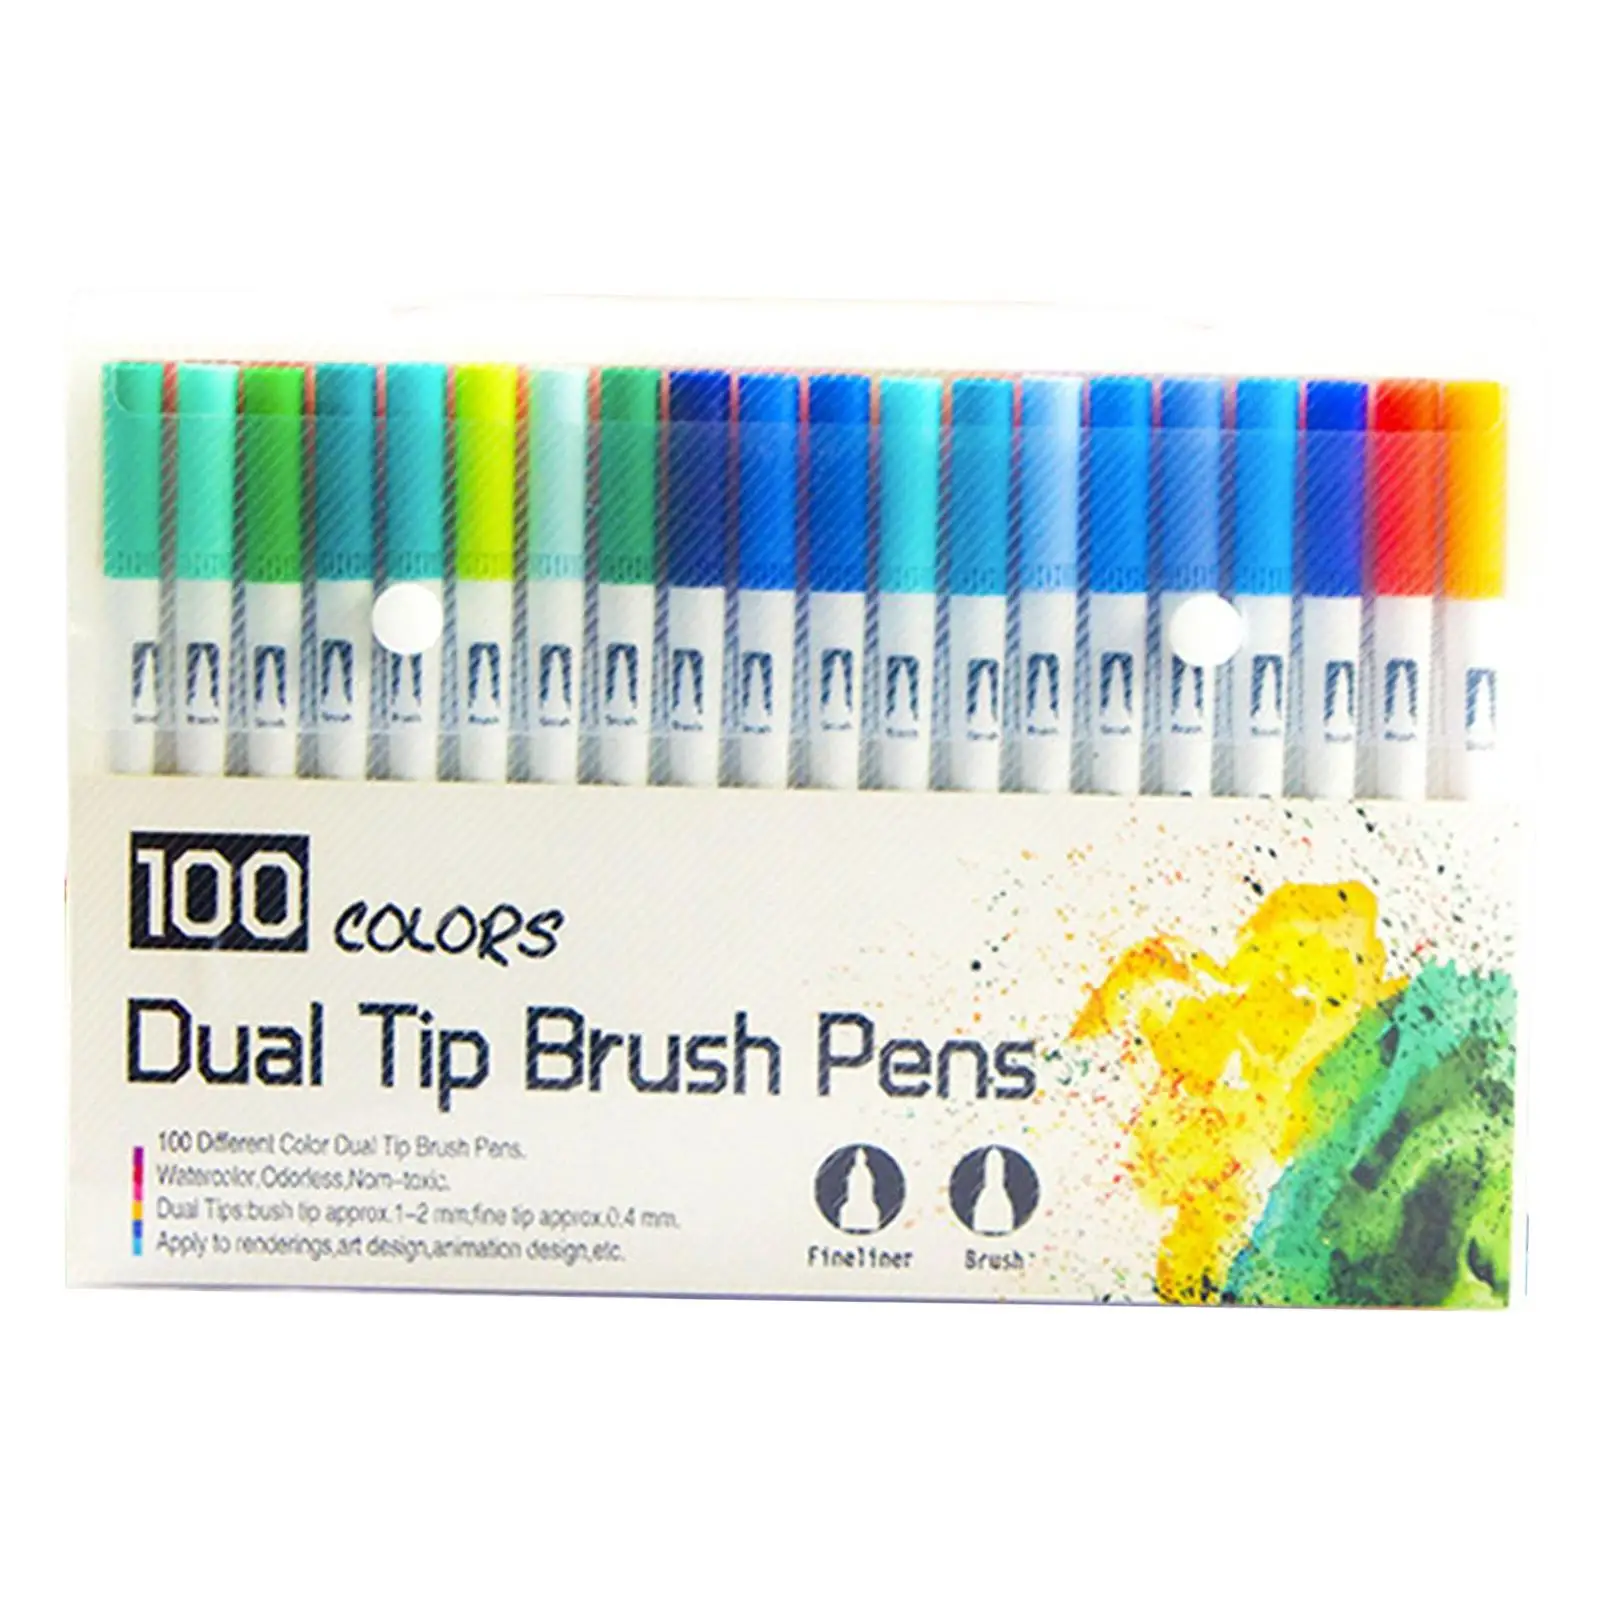 100x Dual Tip Brush Pens Coloring Writing for Child Calligraphy Art Supplies